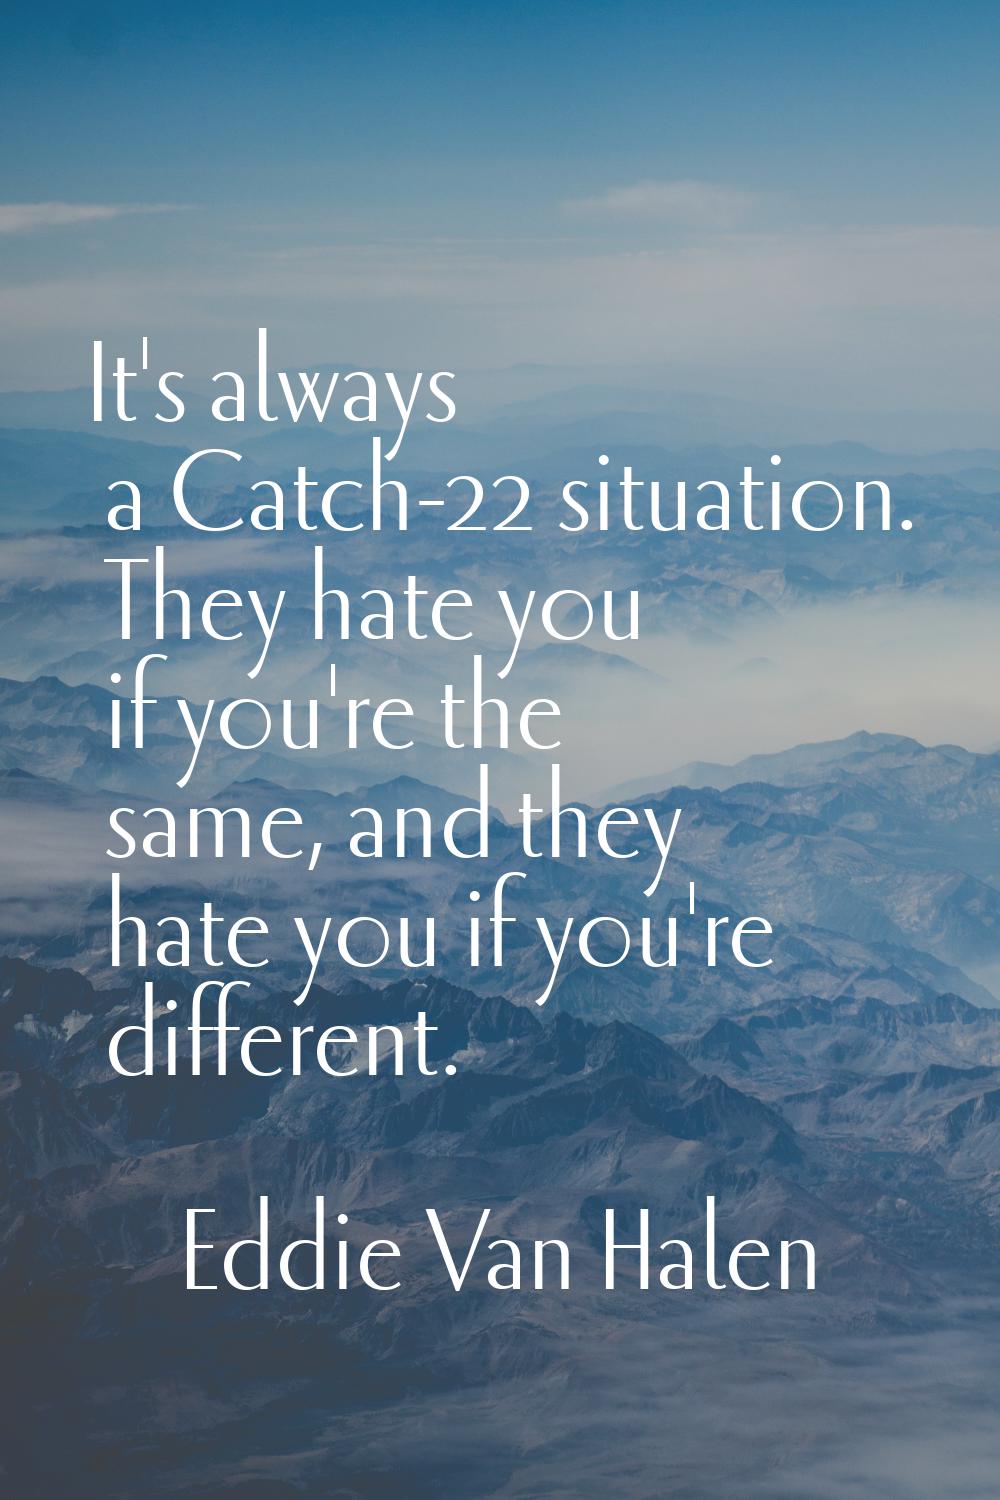 It's always a Catch-22 situation. They hate you if you're the same, and they hate you if you're dif